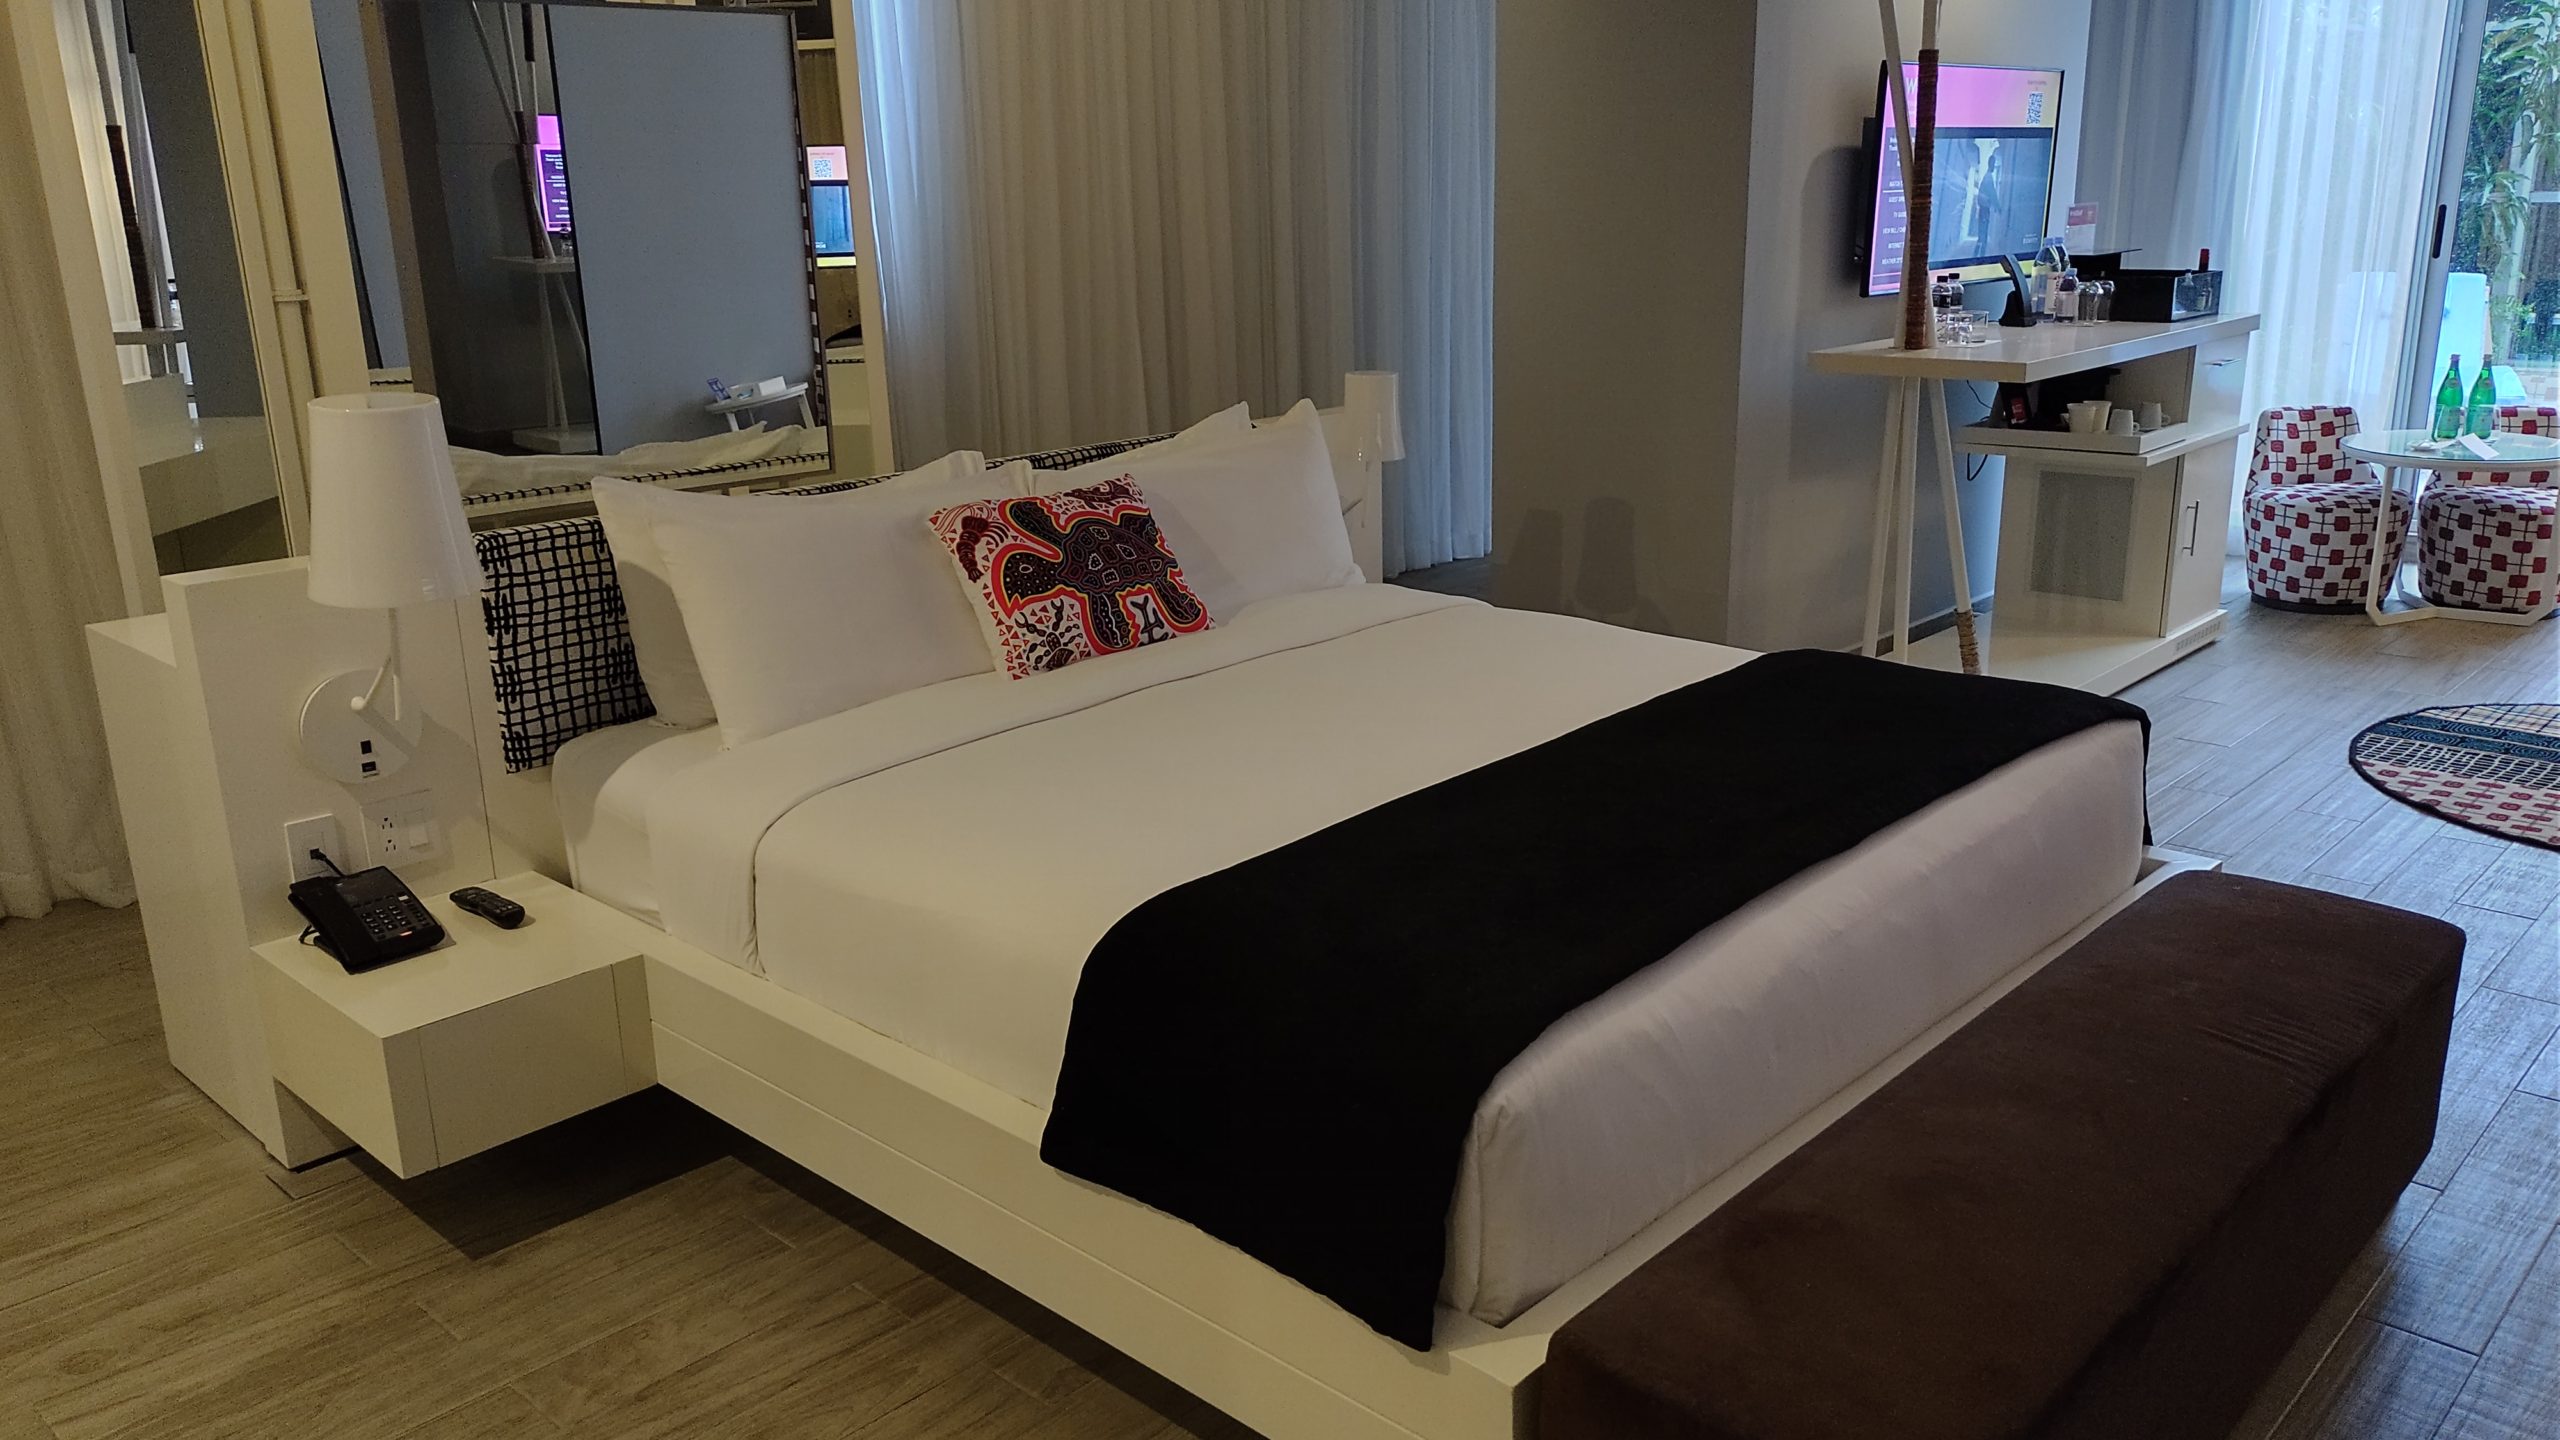 picture of the bed in the room.